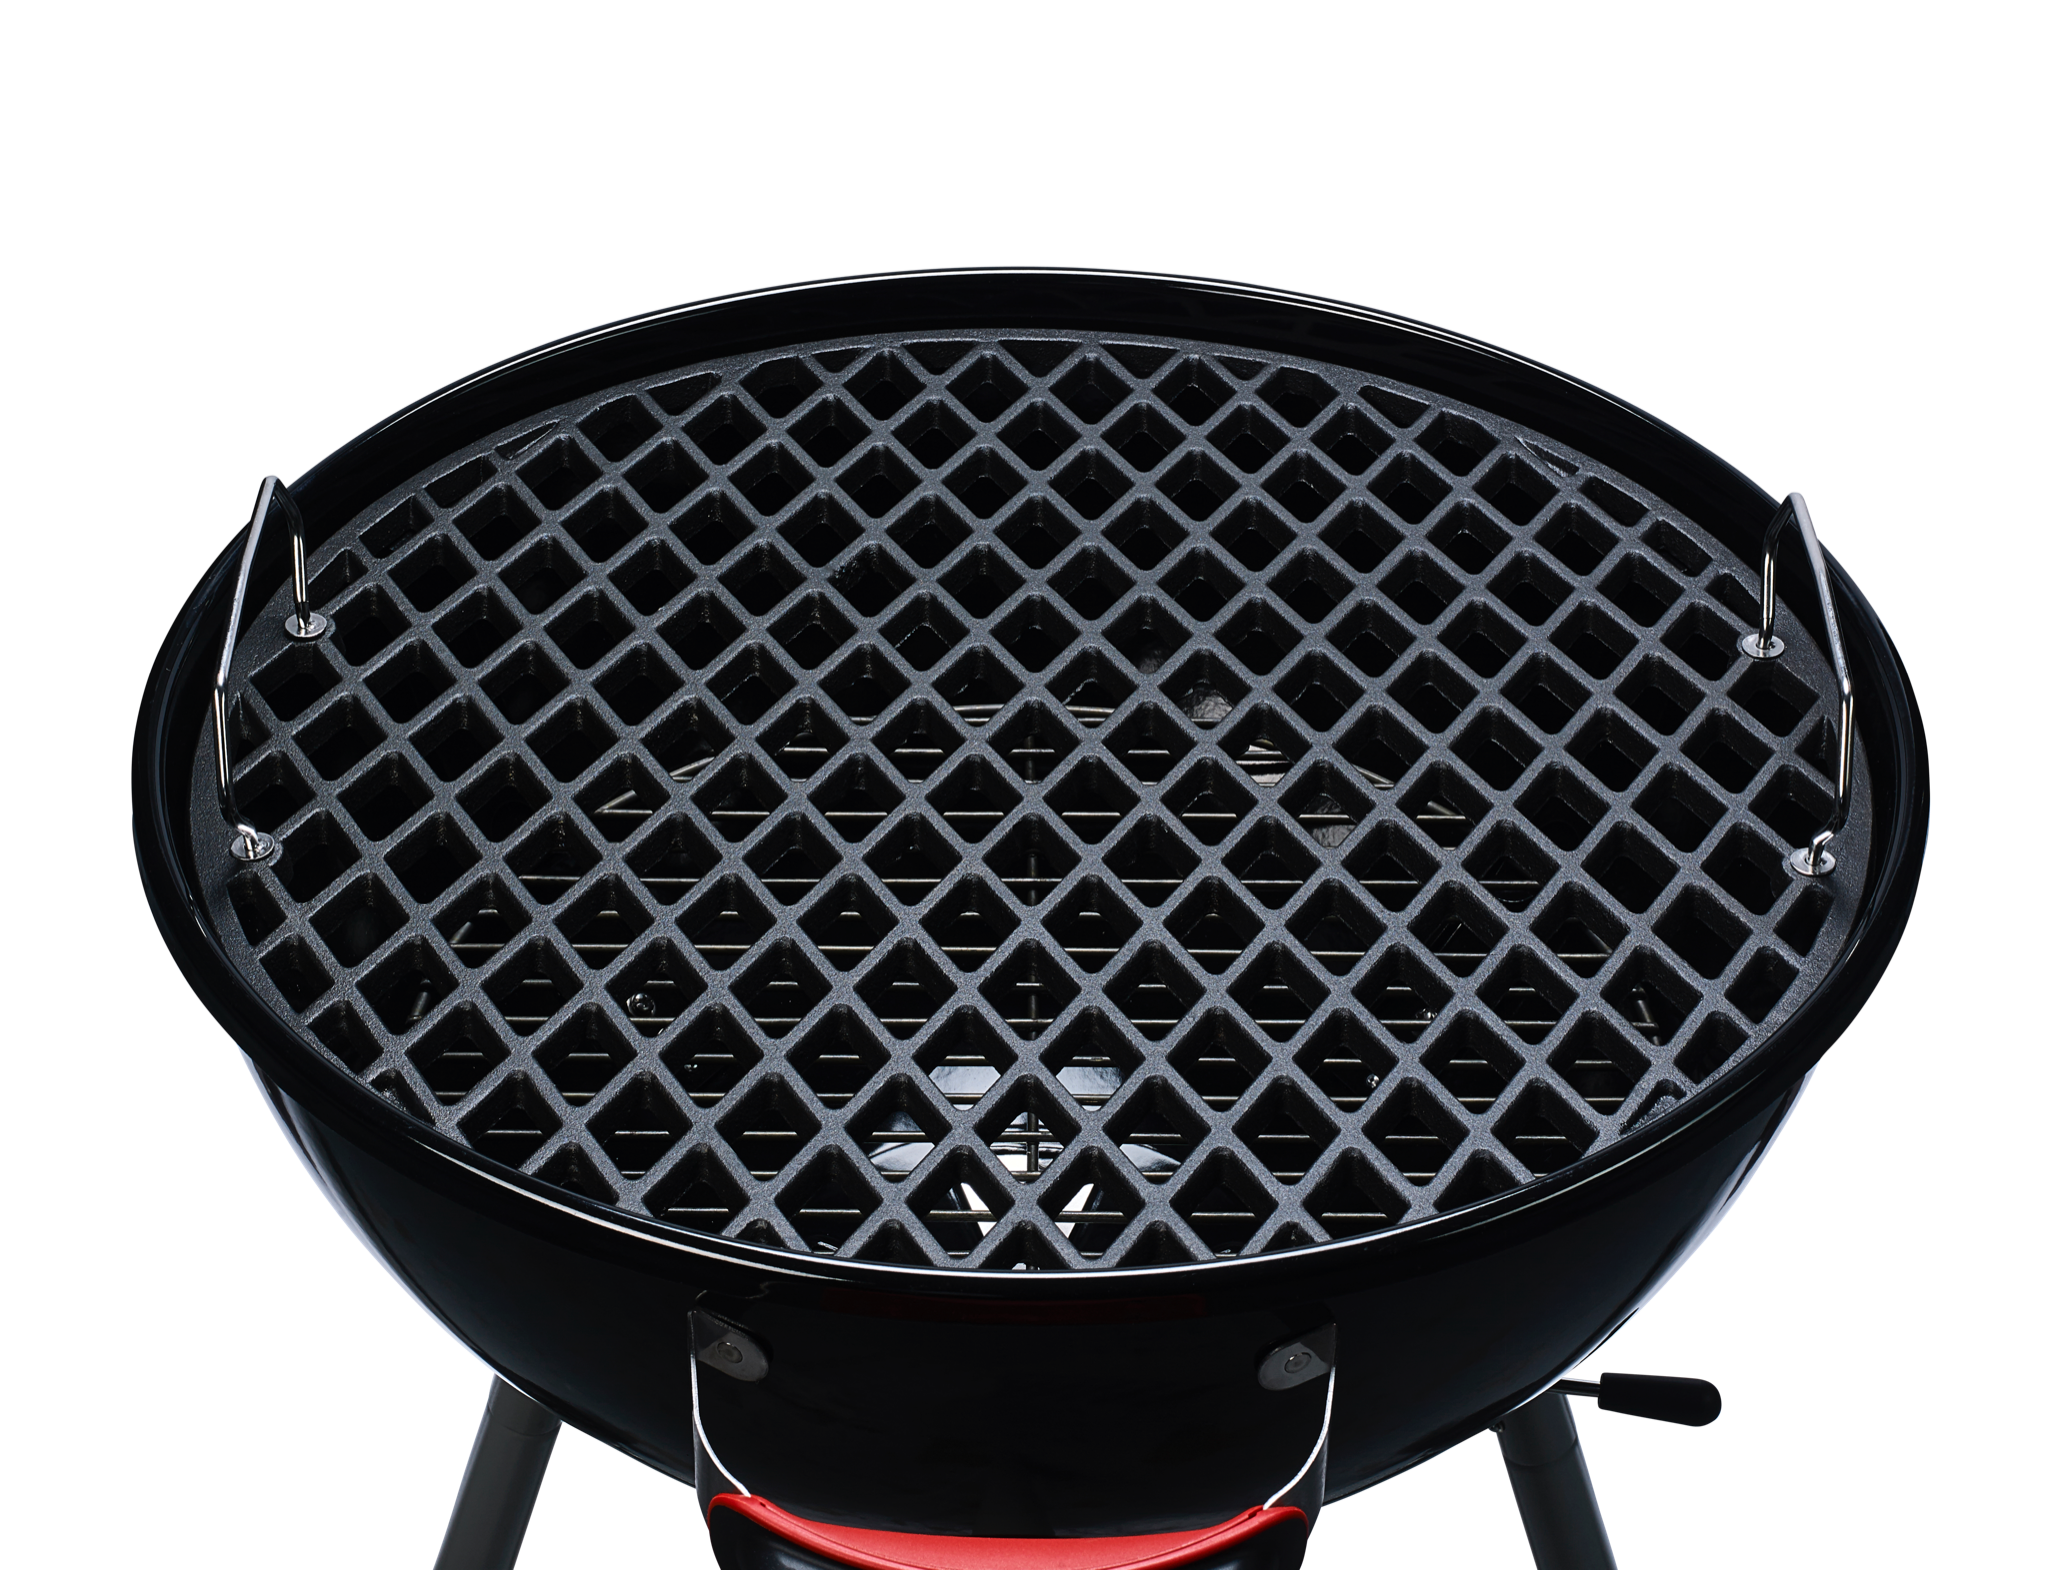 Cast iron Grill Grid with diamond cut and placed in charcoal grill.